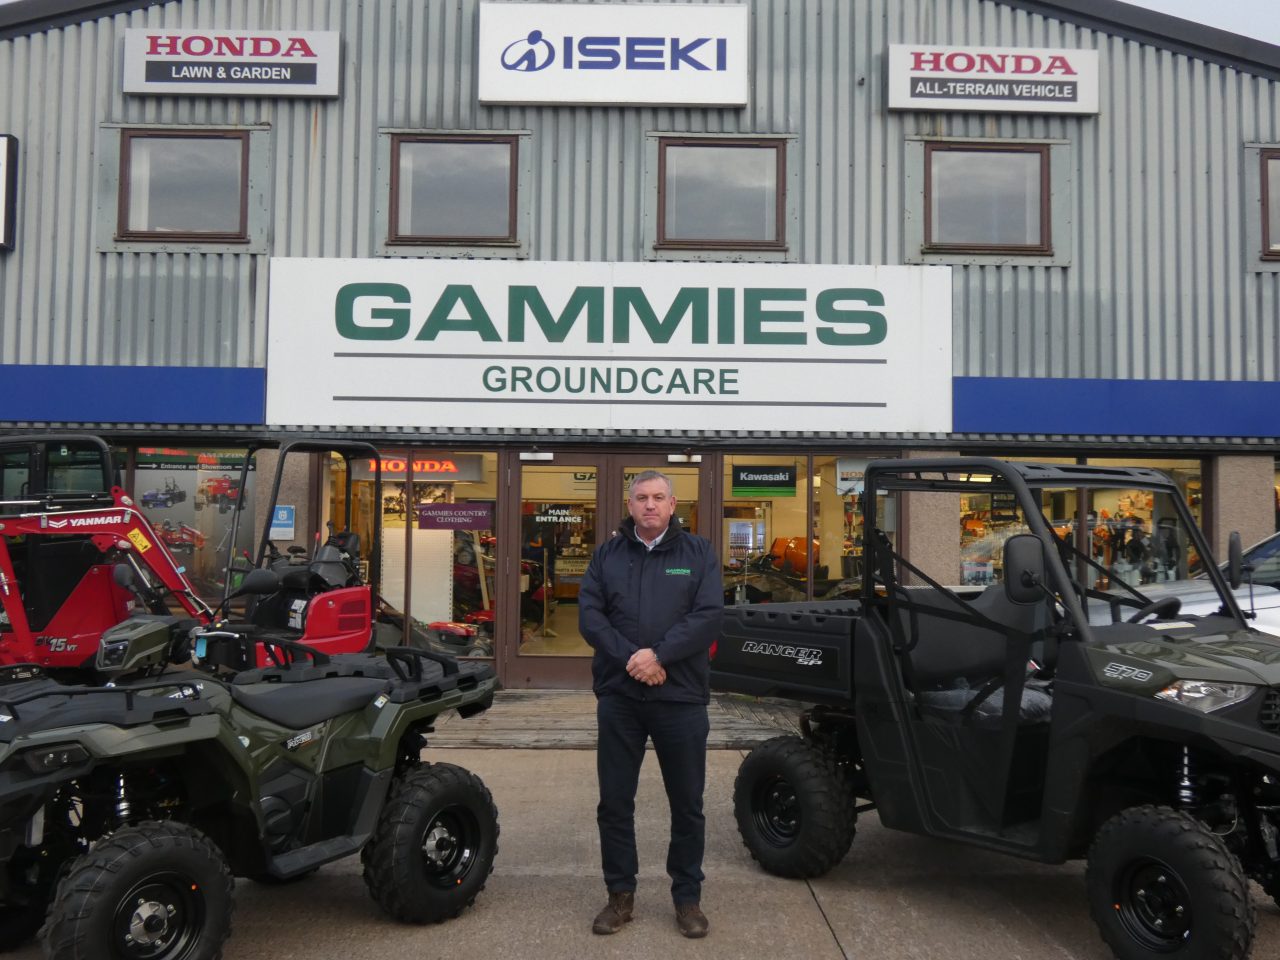 Polaris adds Gammies Groundcare to their dealer network